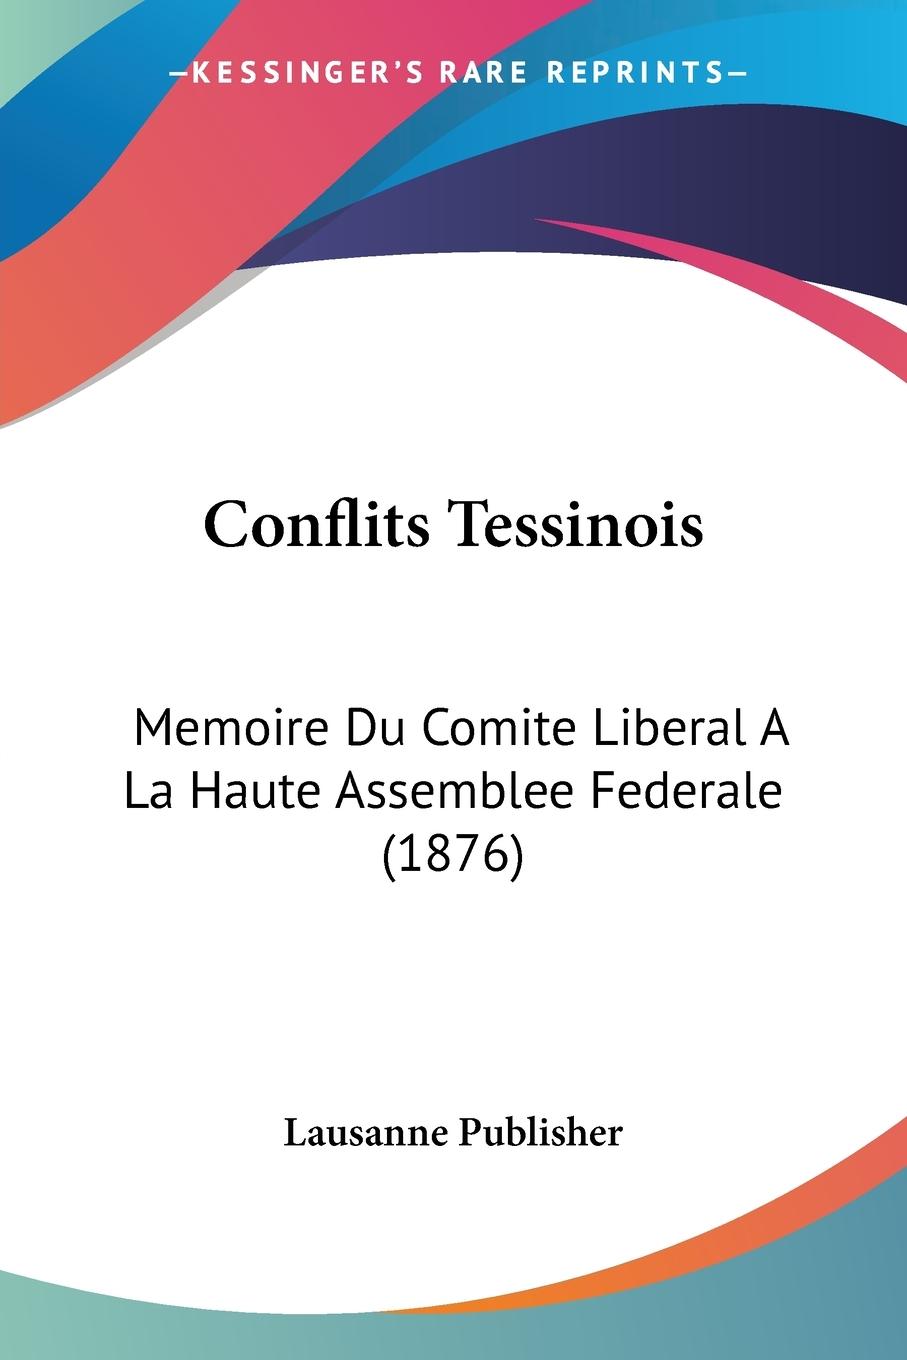 Conflits Tessinois - Lausanne Publisher